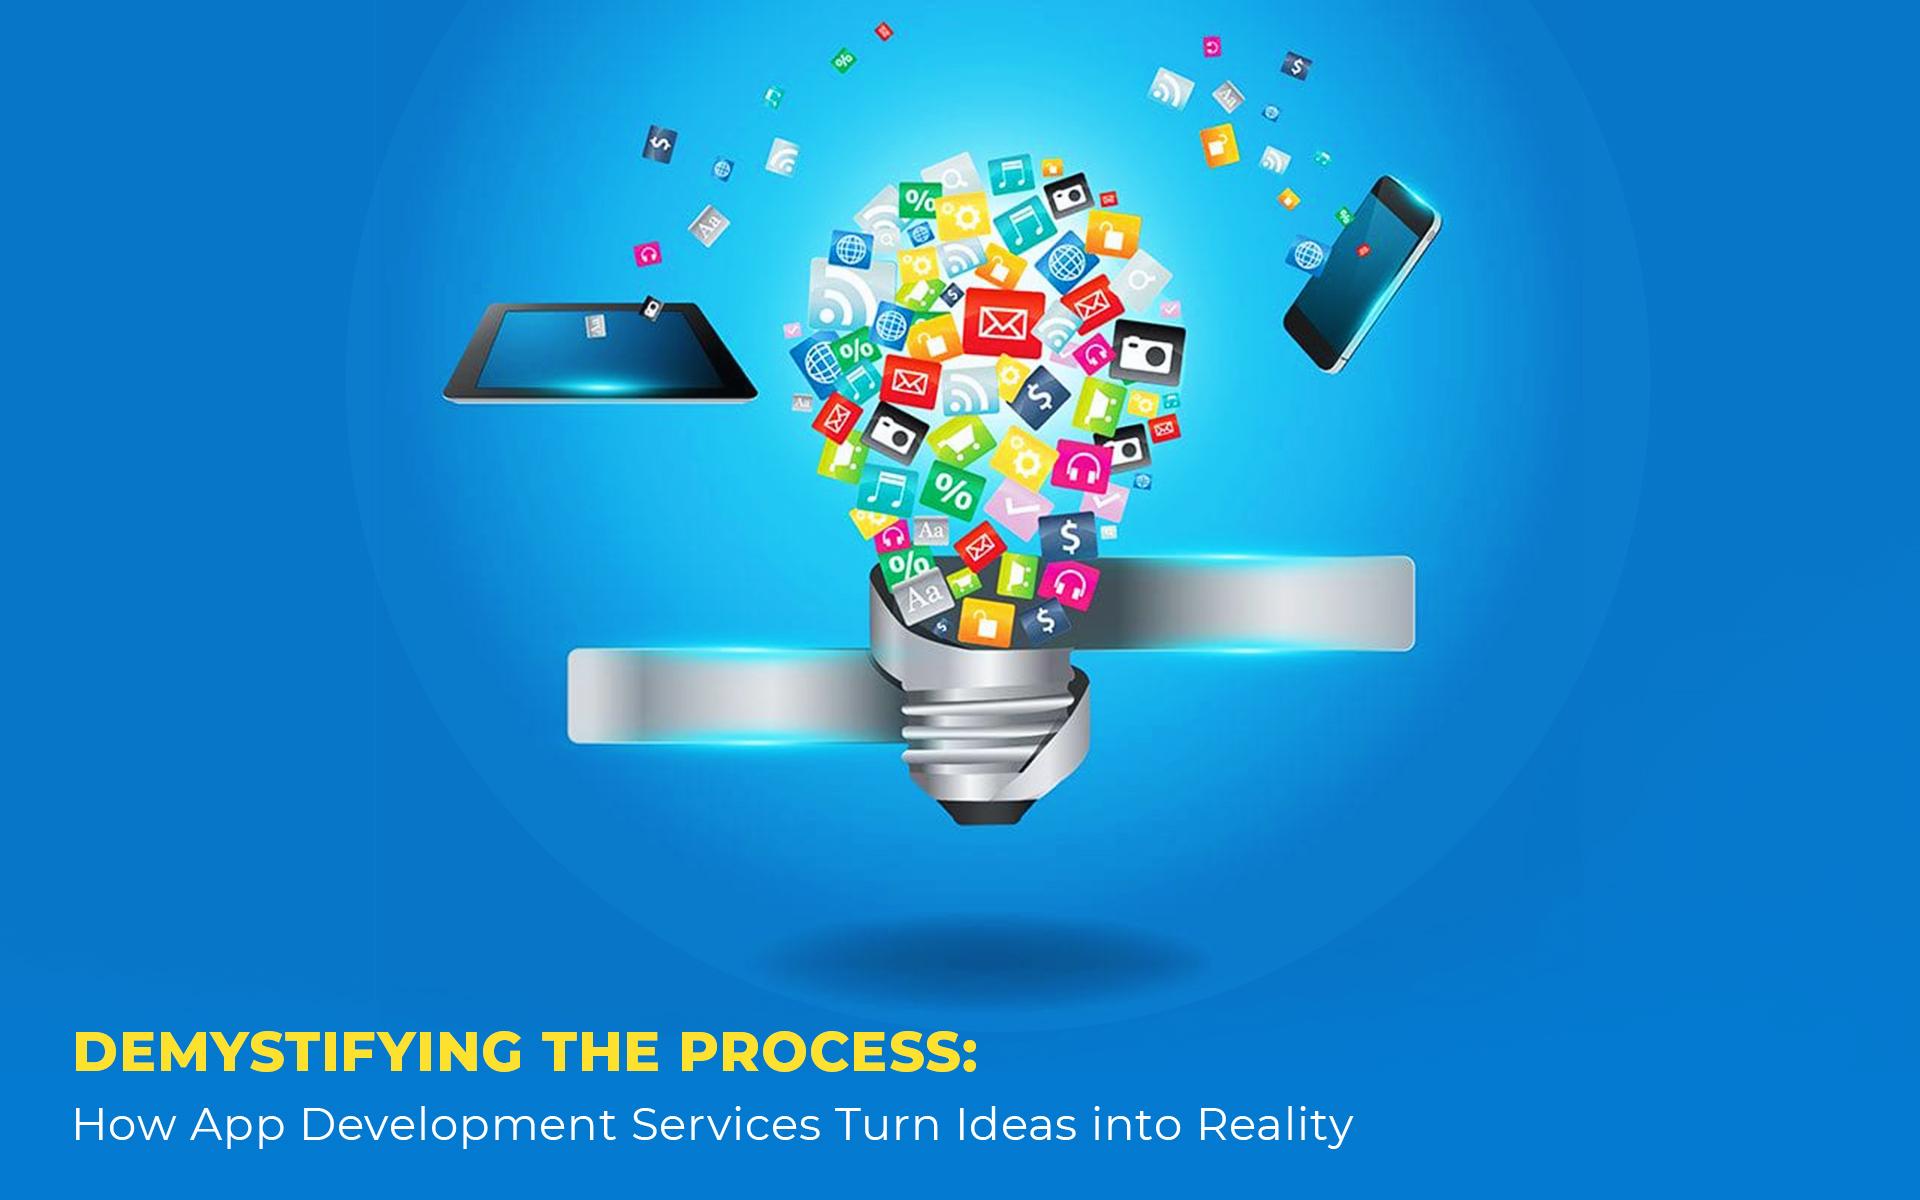 Demystifying the Process: How App Development Services Turn Ideas into Reality